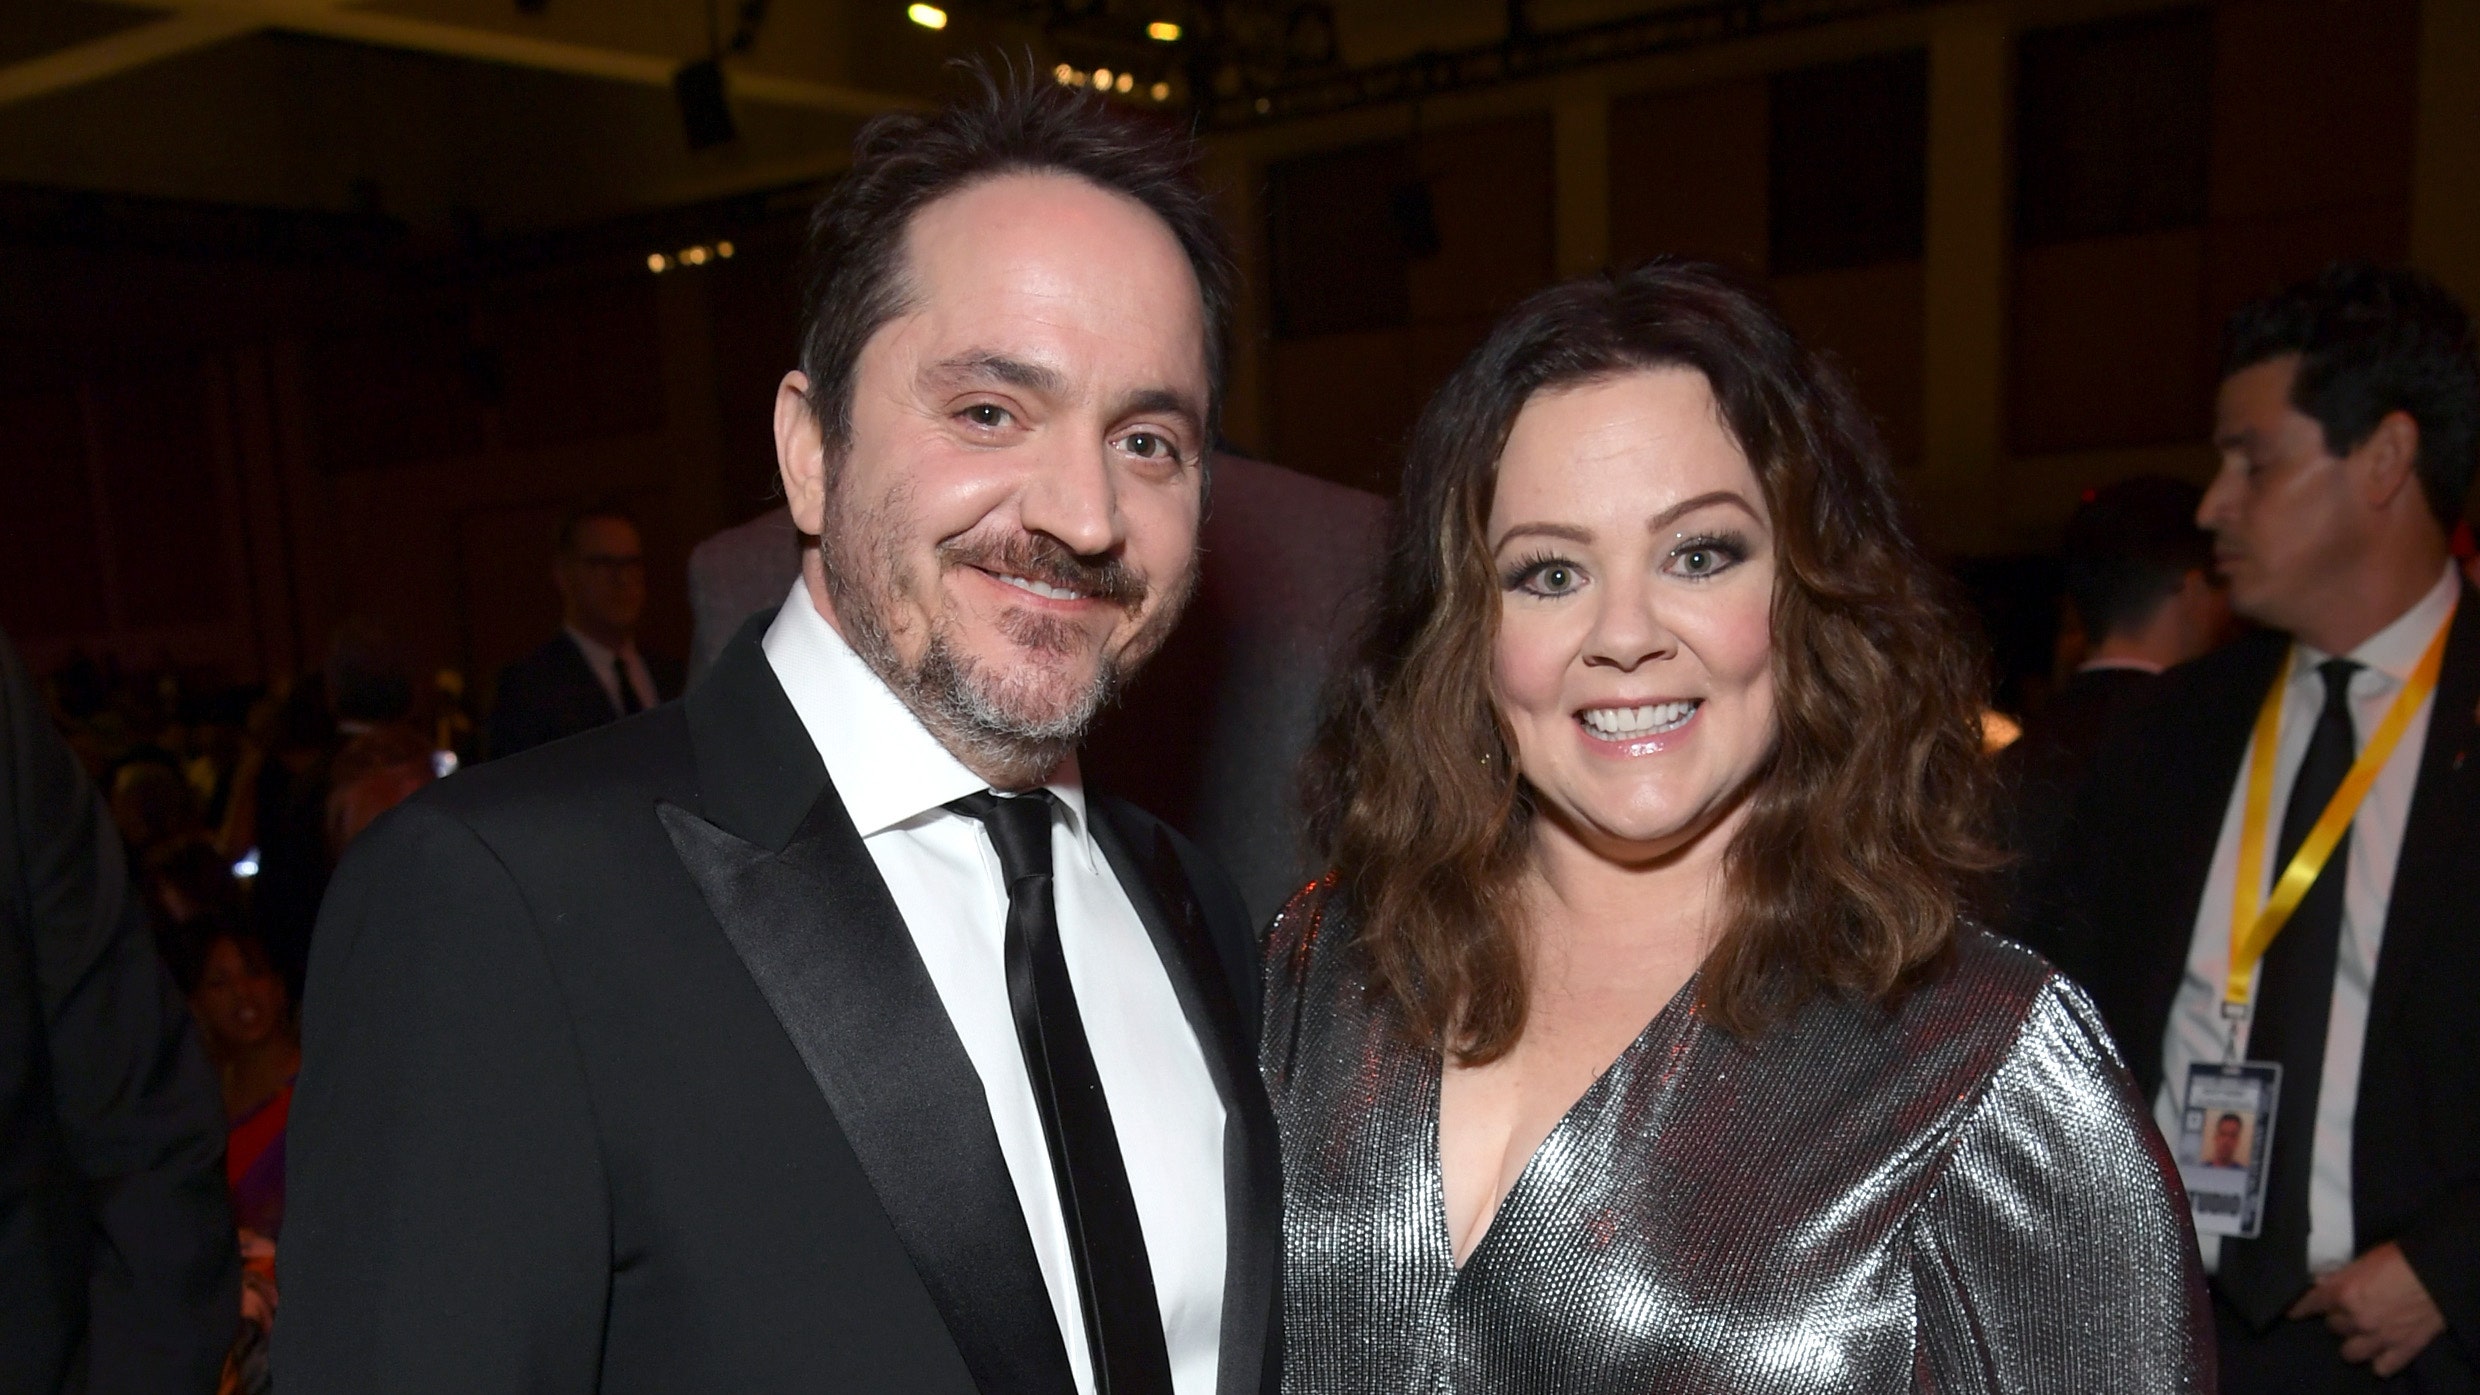 Ben Falcone and Melissa McCarthy smiling